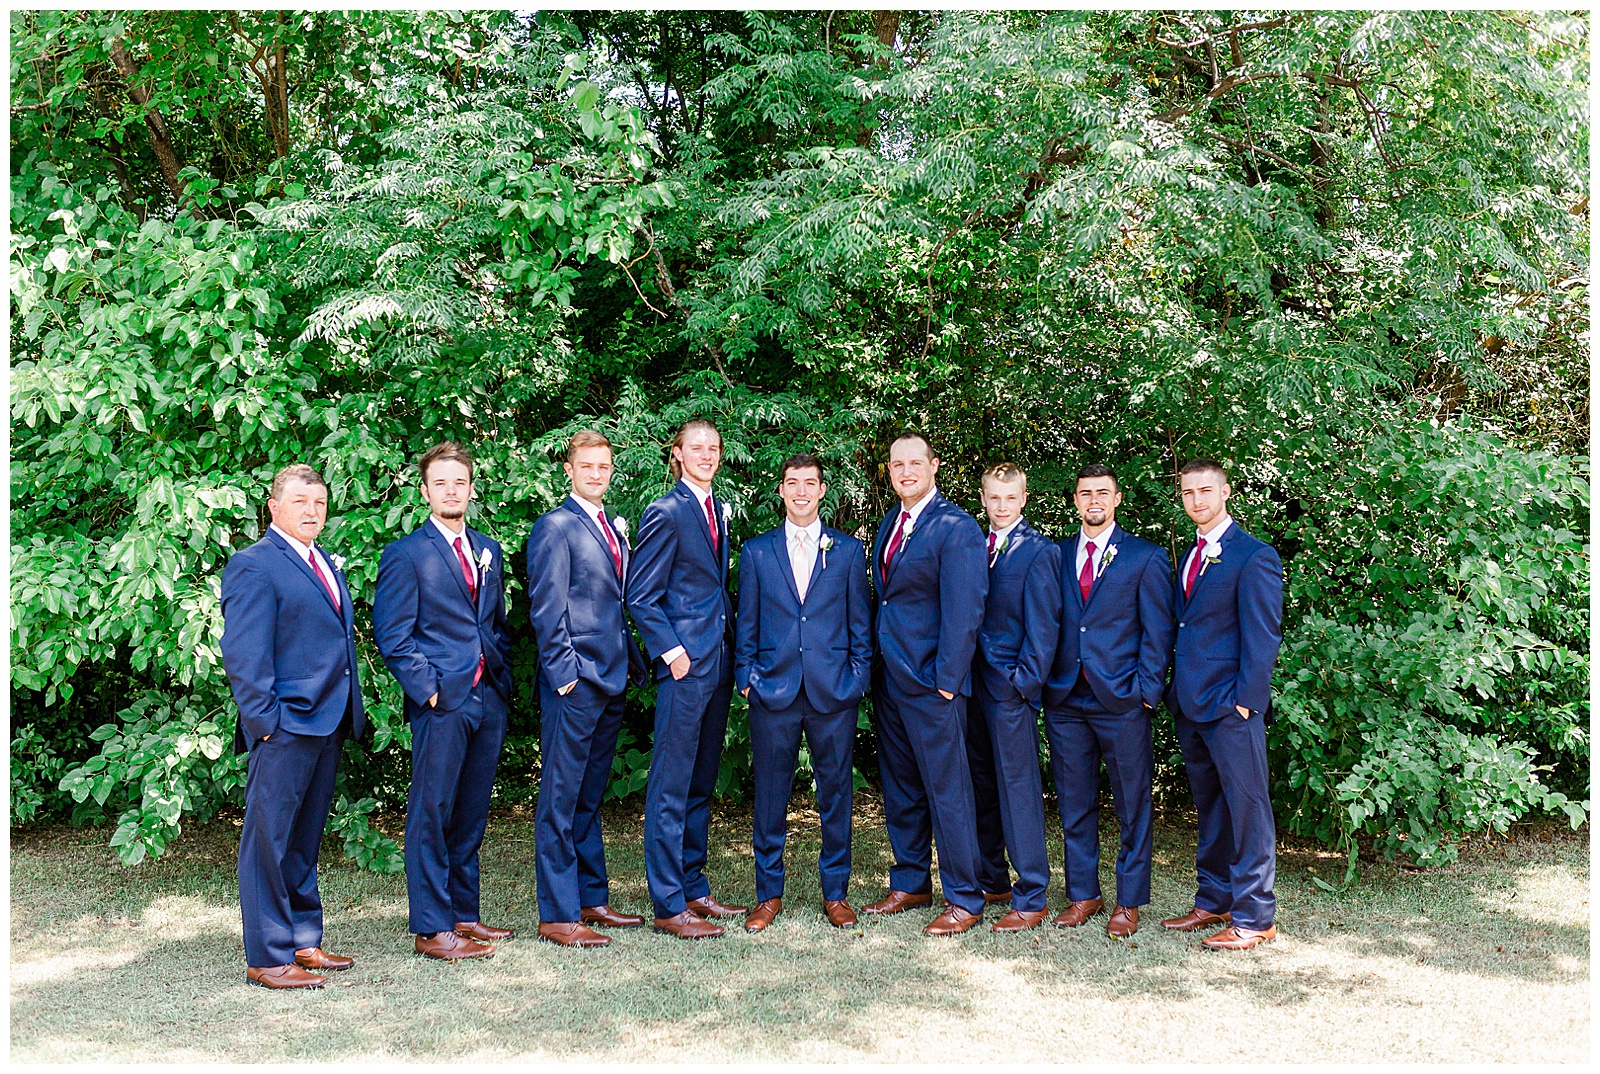 Groom and Groomsmen Group Photo in Blue Suits from Summer Wedding in Charlotte, NC | Check out the full wedding at KevynDixonPhoto.com